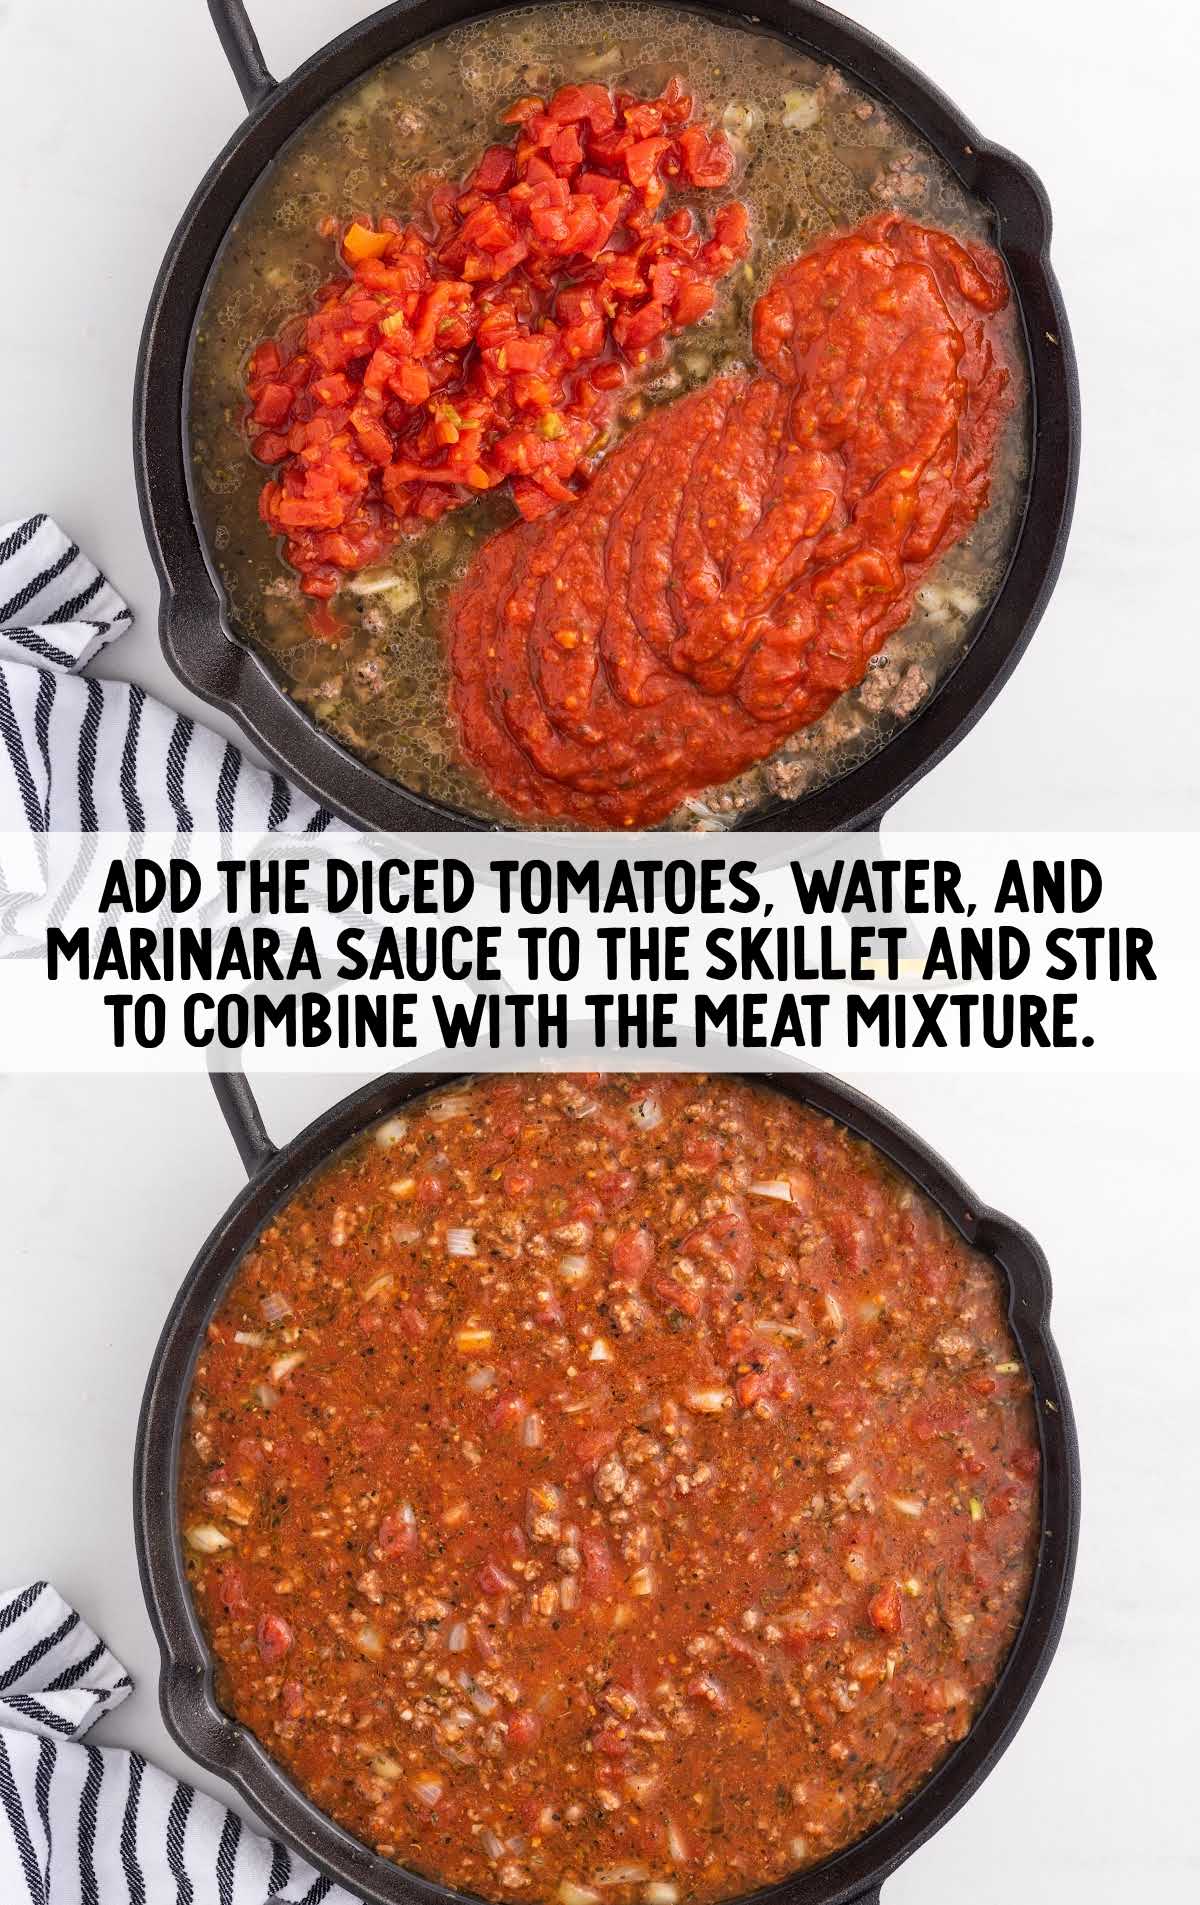 diced tomatoes, water, and marinara sauce added to the skillet of ground beef